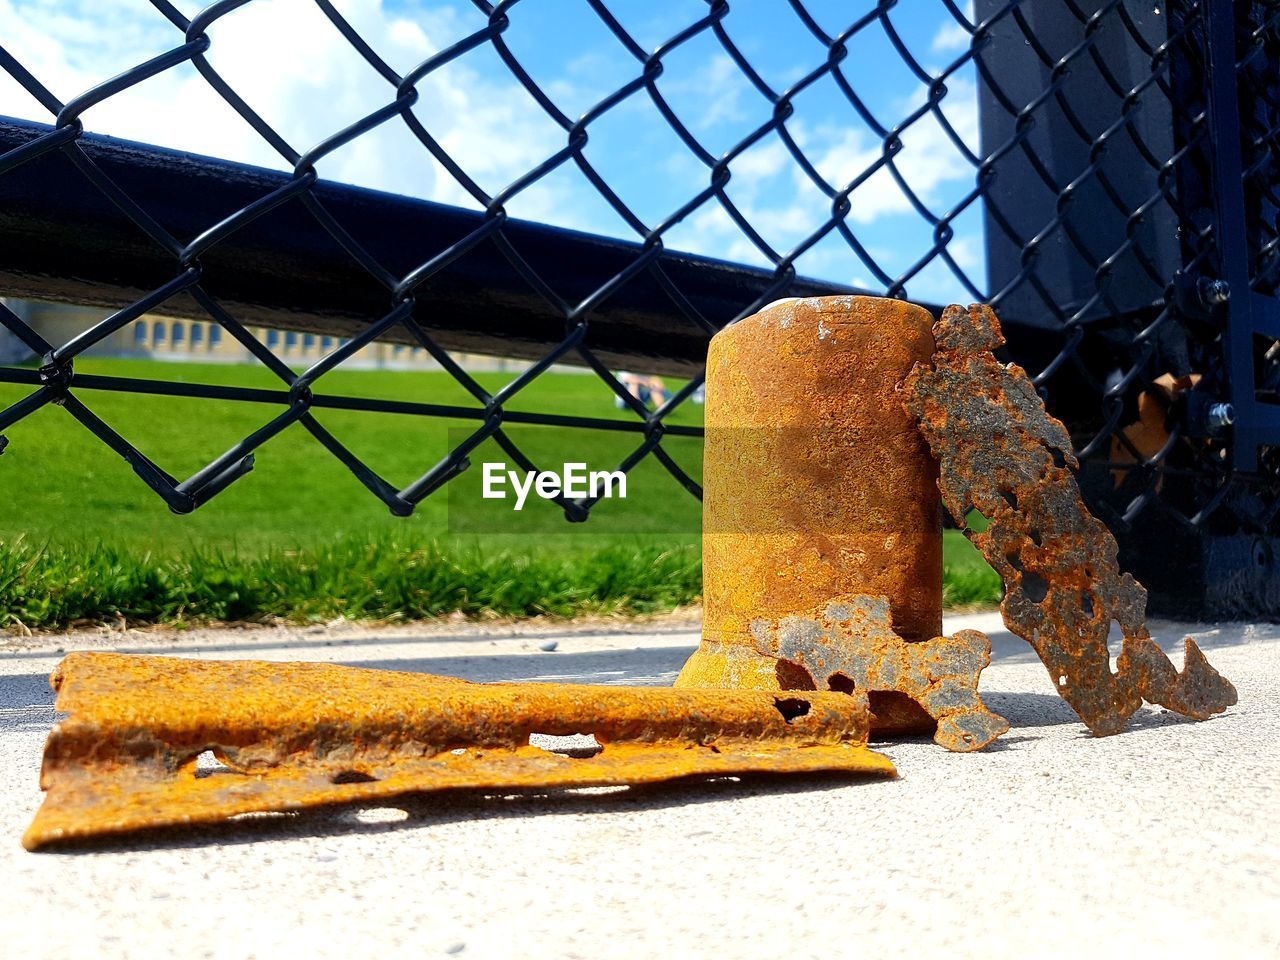 CLOSE-UP OF RUSTY METAL FENCE BY YELLOW CAR